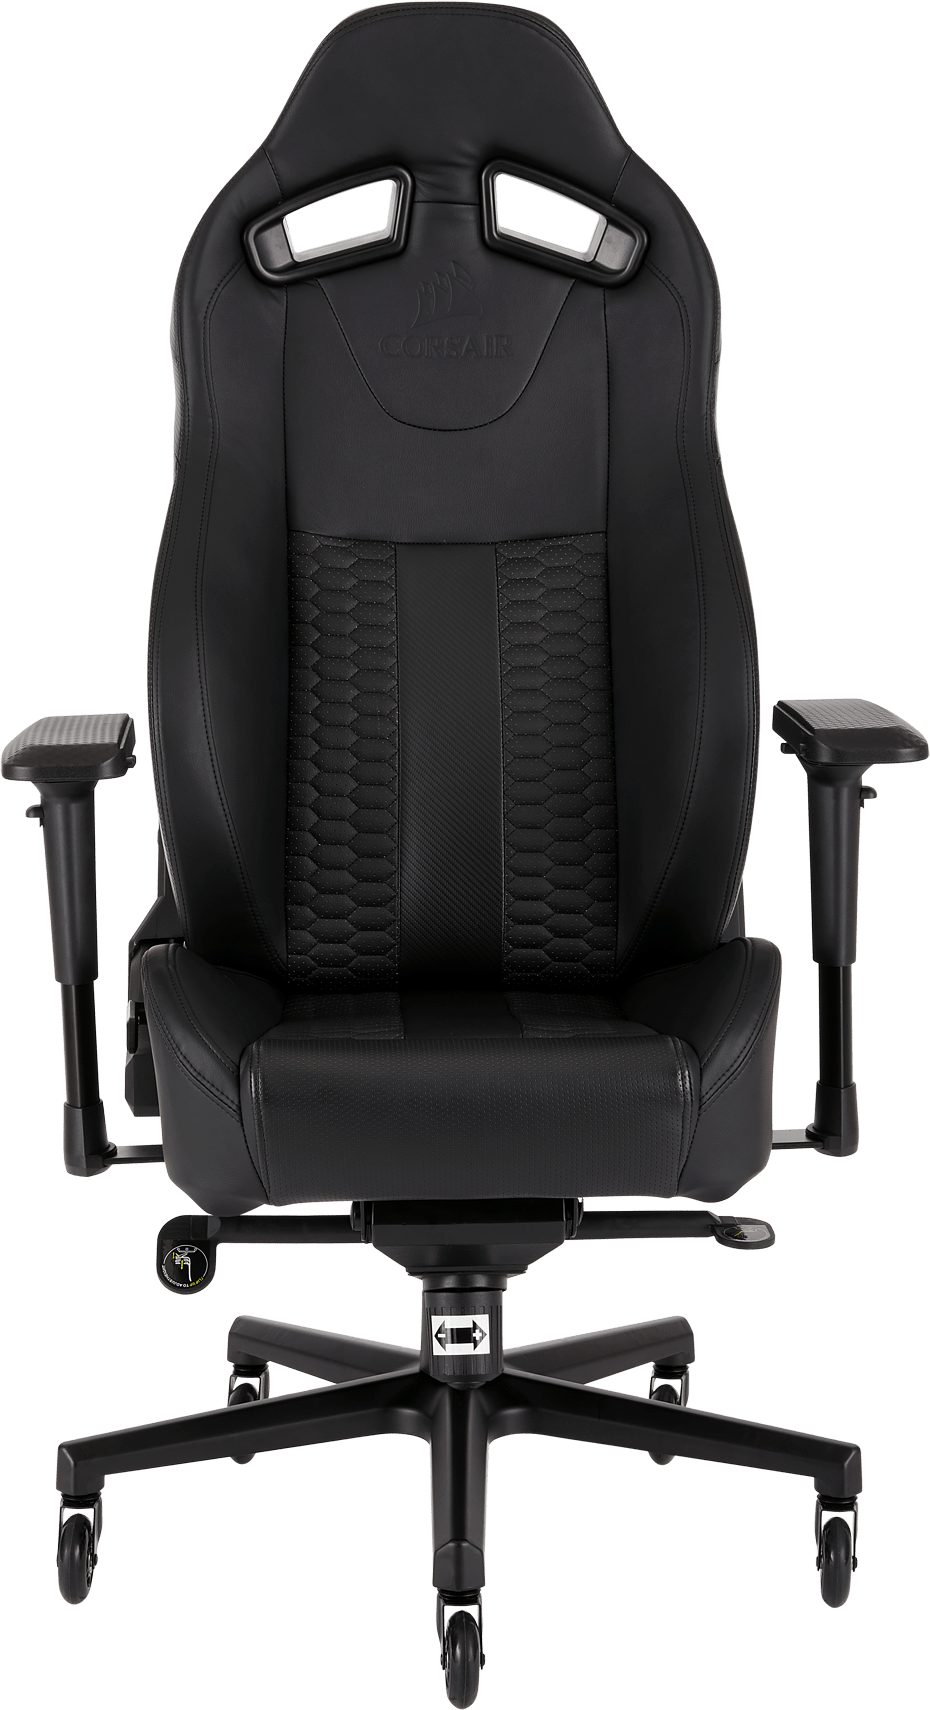 Gym Officer rulletrappe T2 ROAD WARRIOR Gaming Chair — Black/Black